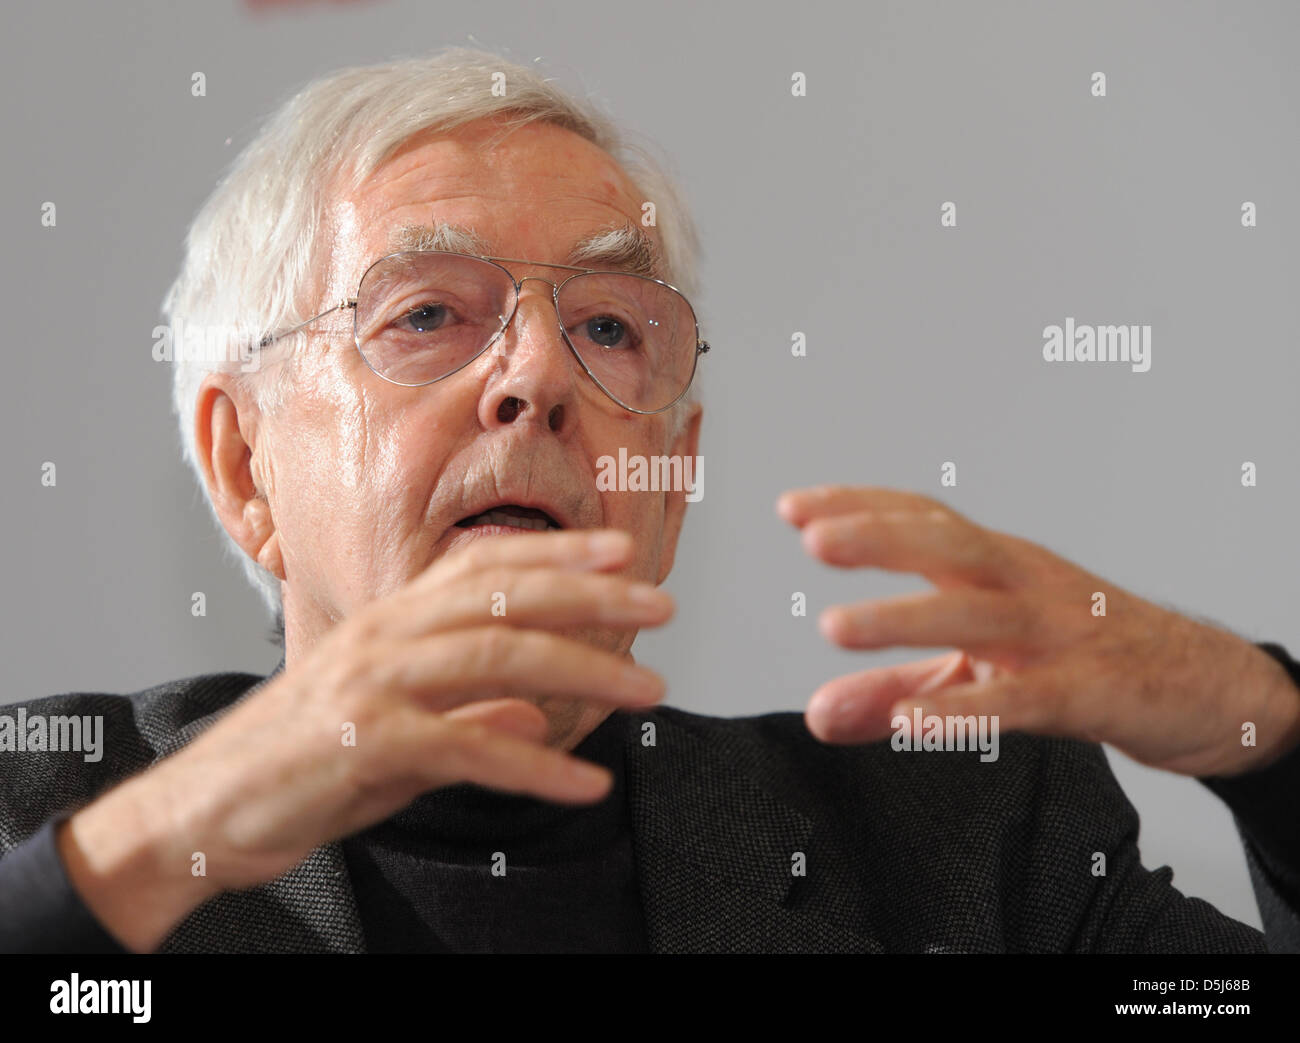 Architect and urban planner Albert Speer, Jr. sits during a press conference for the international highrise award in Frankfurt Main, Germany, 15 November 2012. His father Albert Speer was Hitler's architect and a major figure of the Third Reich. Photo: Arne Dedert Stock Photo